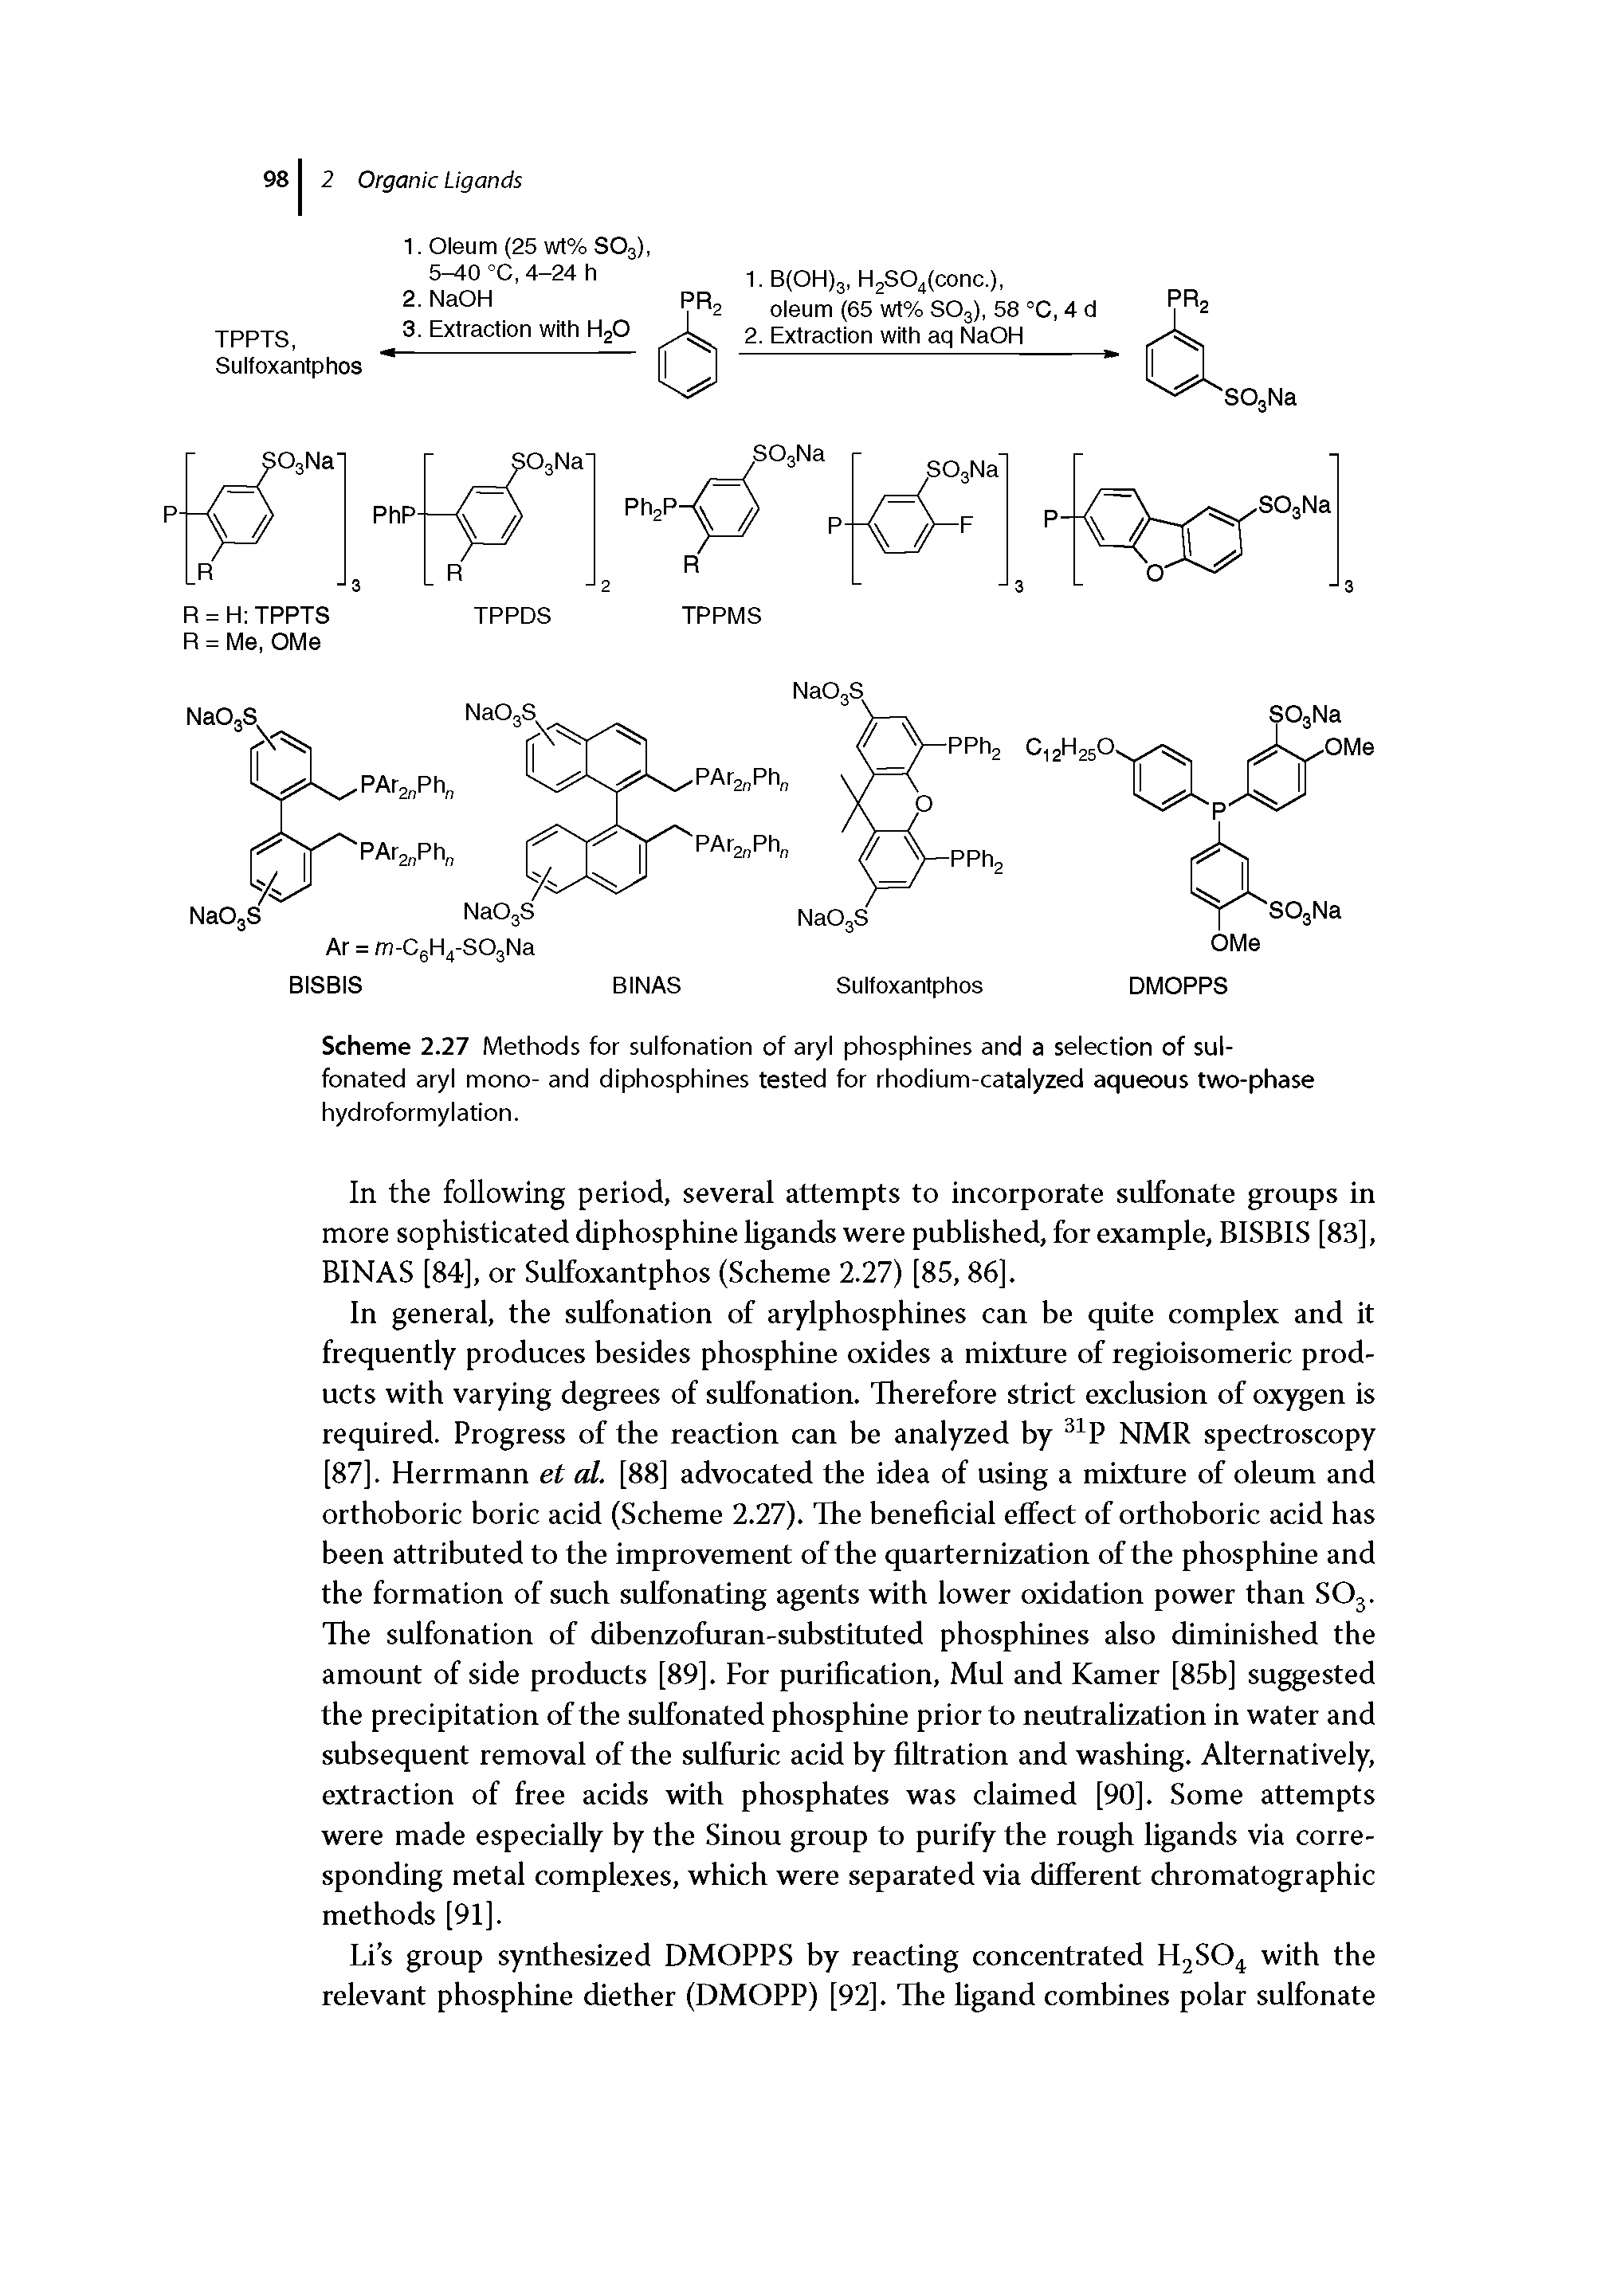 Scheme 2.27 Methods for sulfonation of aryl phosphines and a selection of sul-fonated aryl mono- and diphosphines tested for rhodium-catalyzed aqueous two-phase hydroformylation.